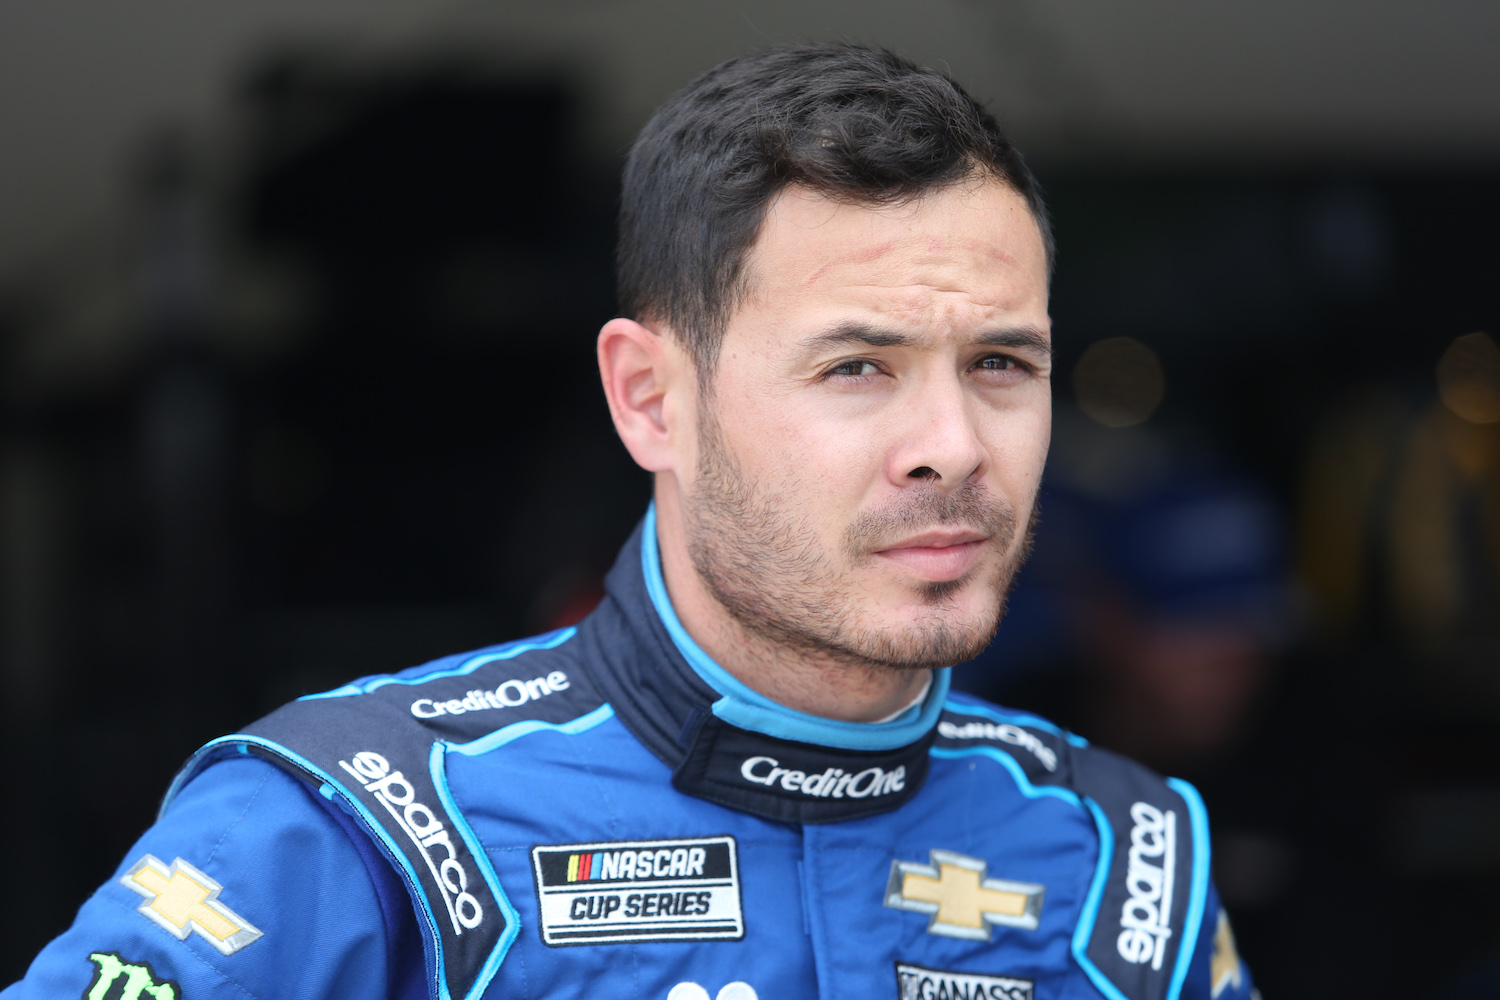 Could Kyle Larson Be Returning to NASCAR and Hendrick Motorsports?